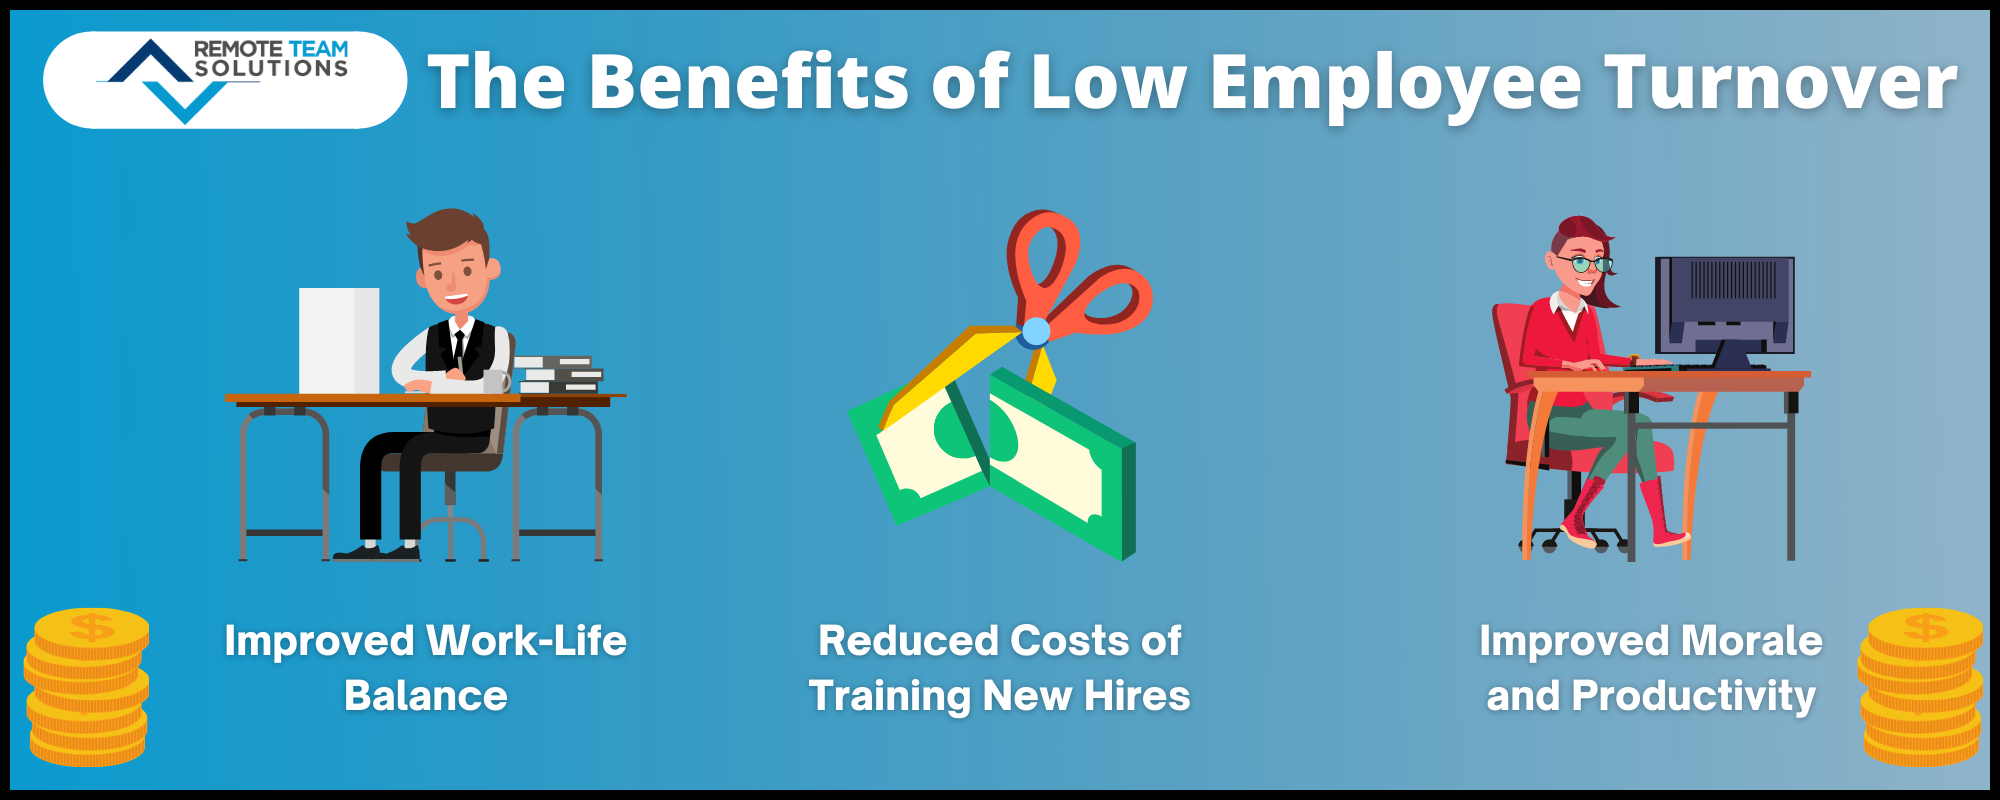 Infographic showing how low employee turnover can benefit companies